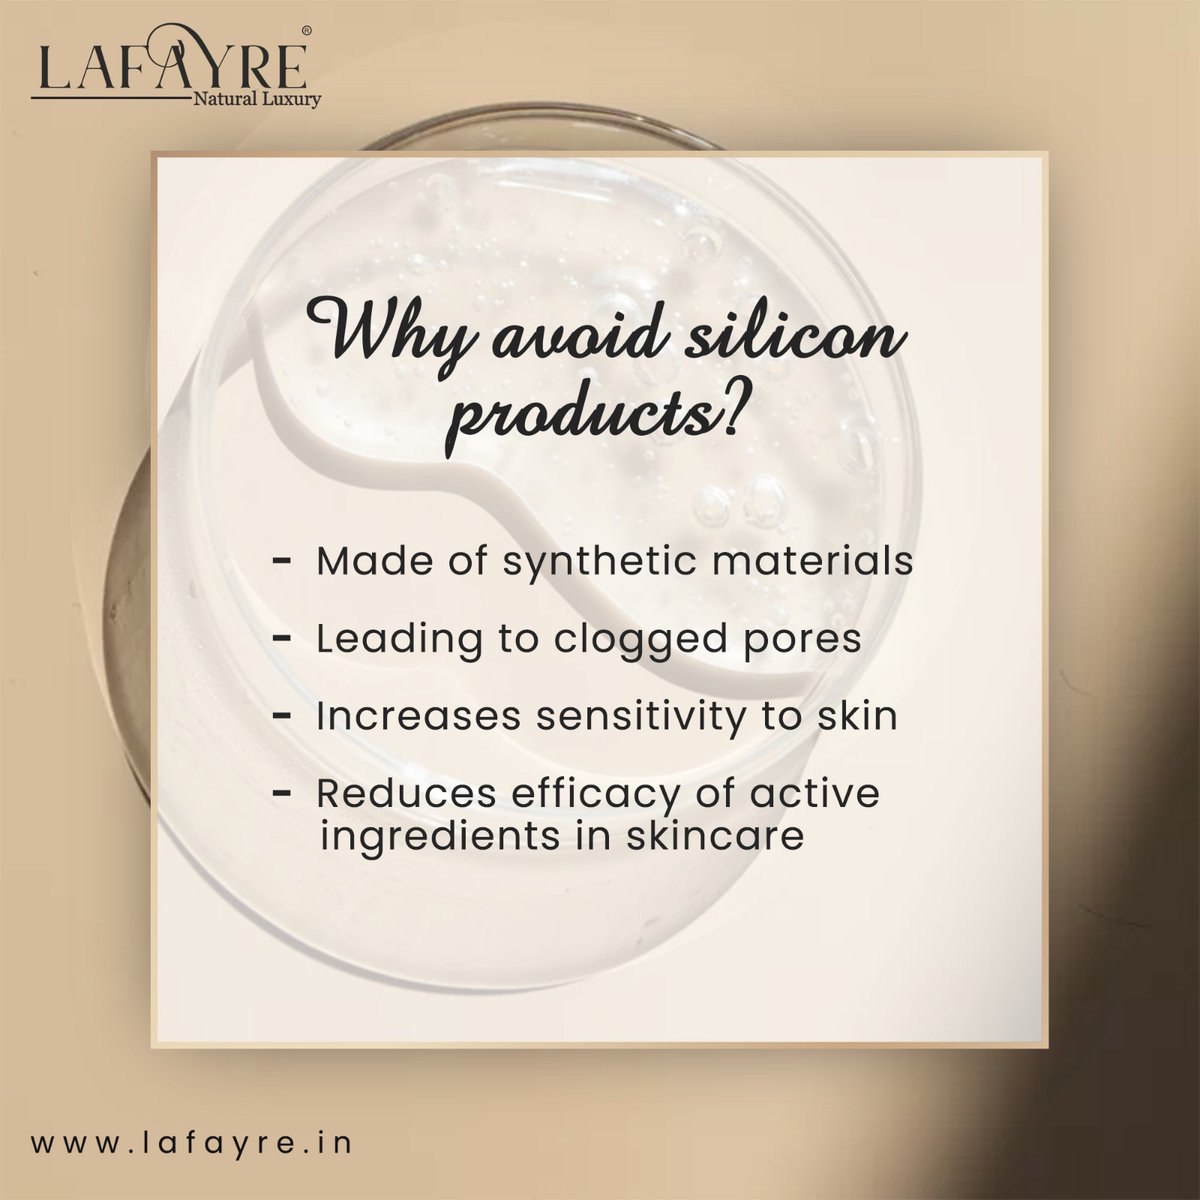 Silicon is used to improve the spreadability of products and can be found in skin and hair products .but harmful to sensitive skin and as well for the environment.

lafayre.in

#lafayre #moreglowtoyou #naturalluxury #healthtip #healthtipoftheday #beautycare #ayurveda